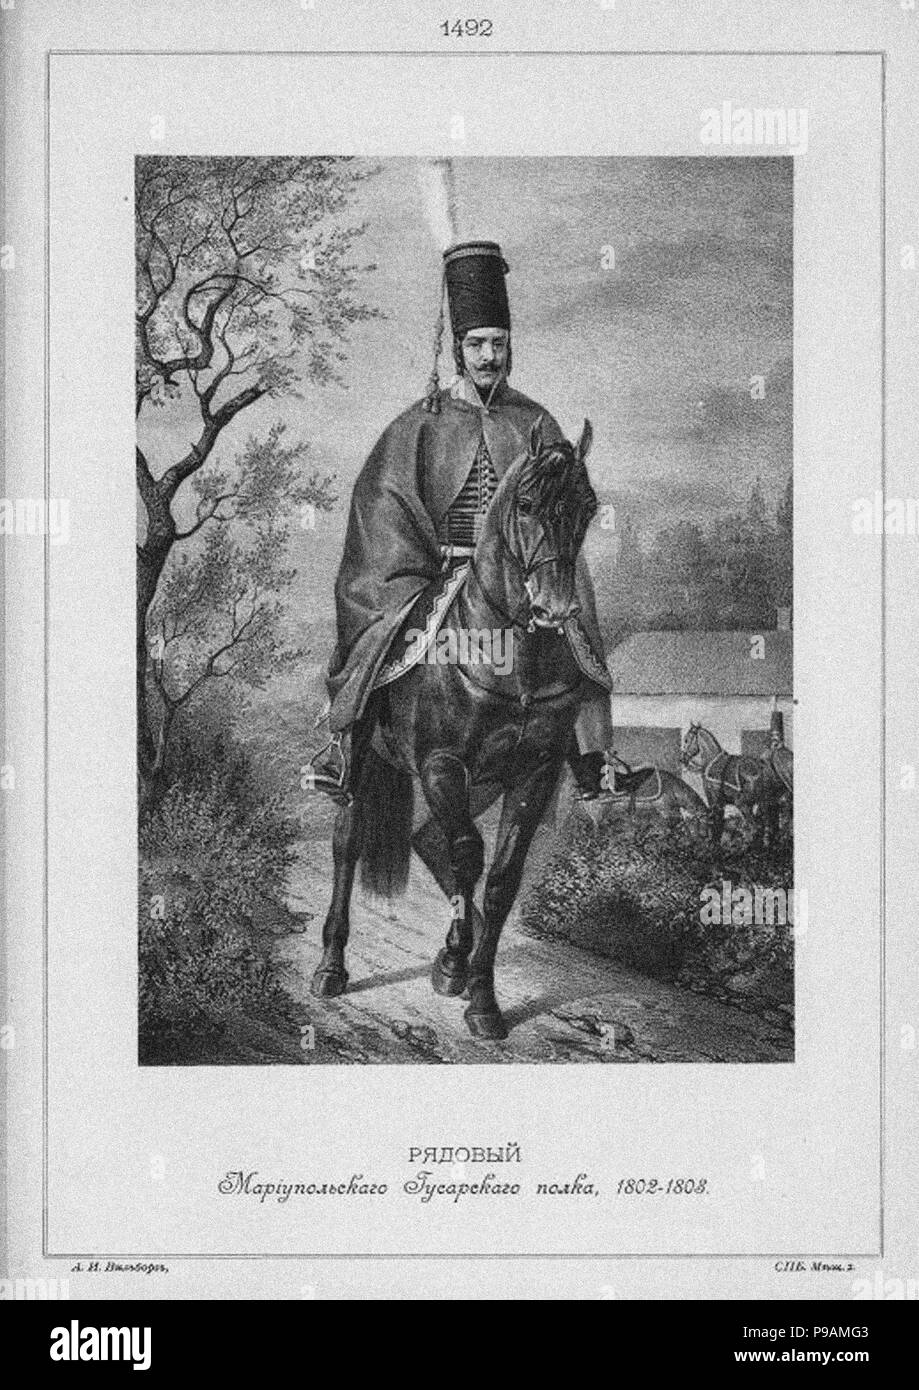 Hussar of the Mariupol Hussar Regiment in 1802-1808. Museum: Russian State Military History Archive. Stock Photo